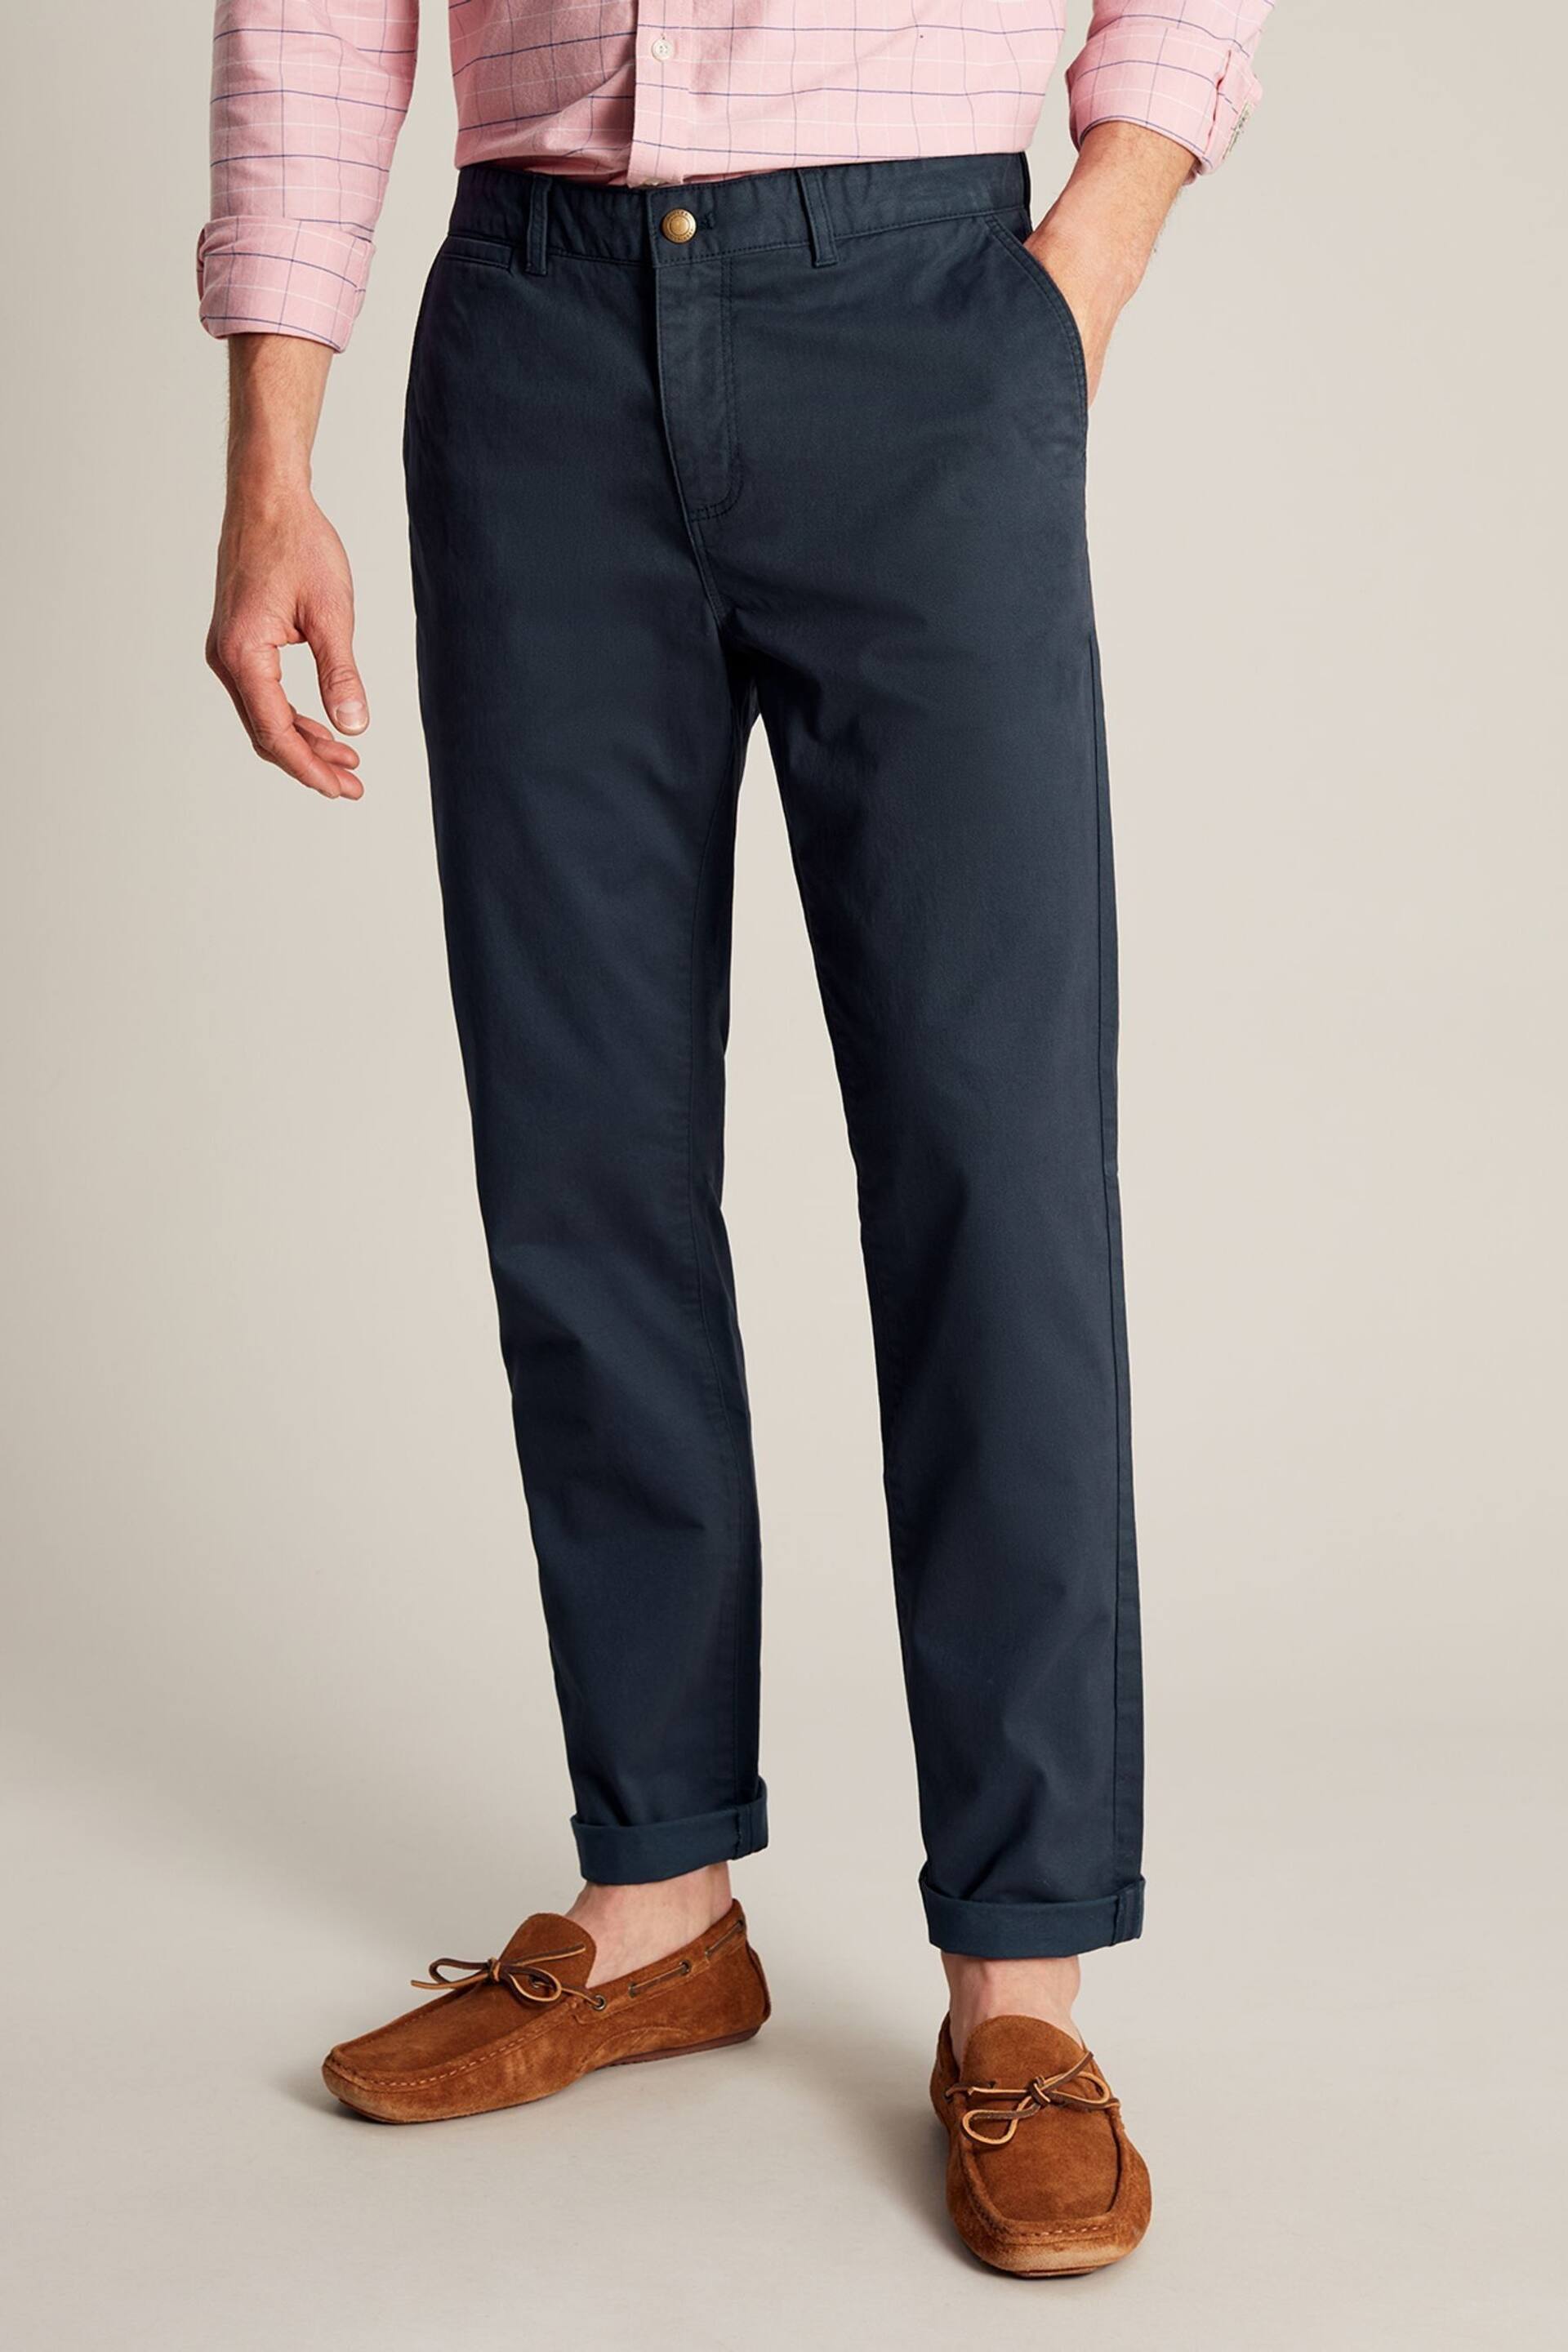 Joules Stamford Navy Slim Fit Chinos - Image 1 of 5